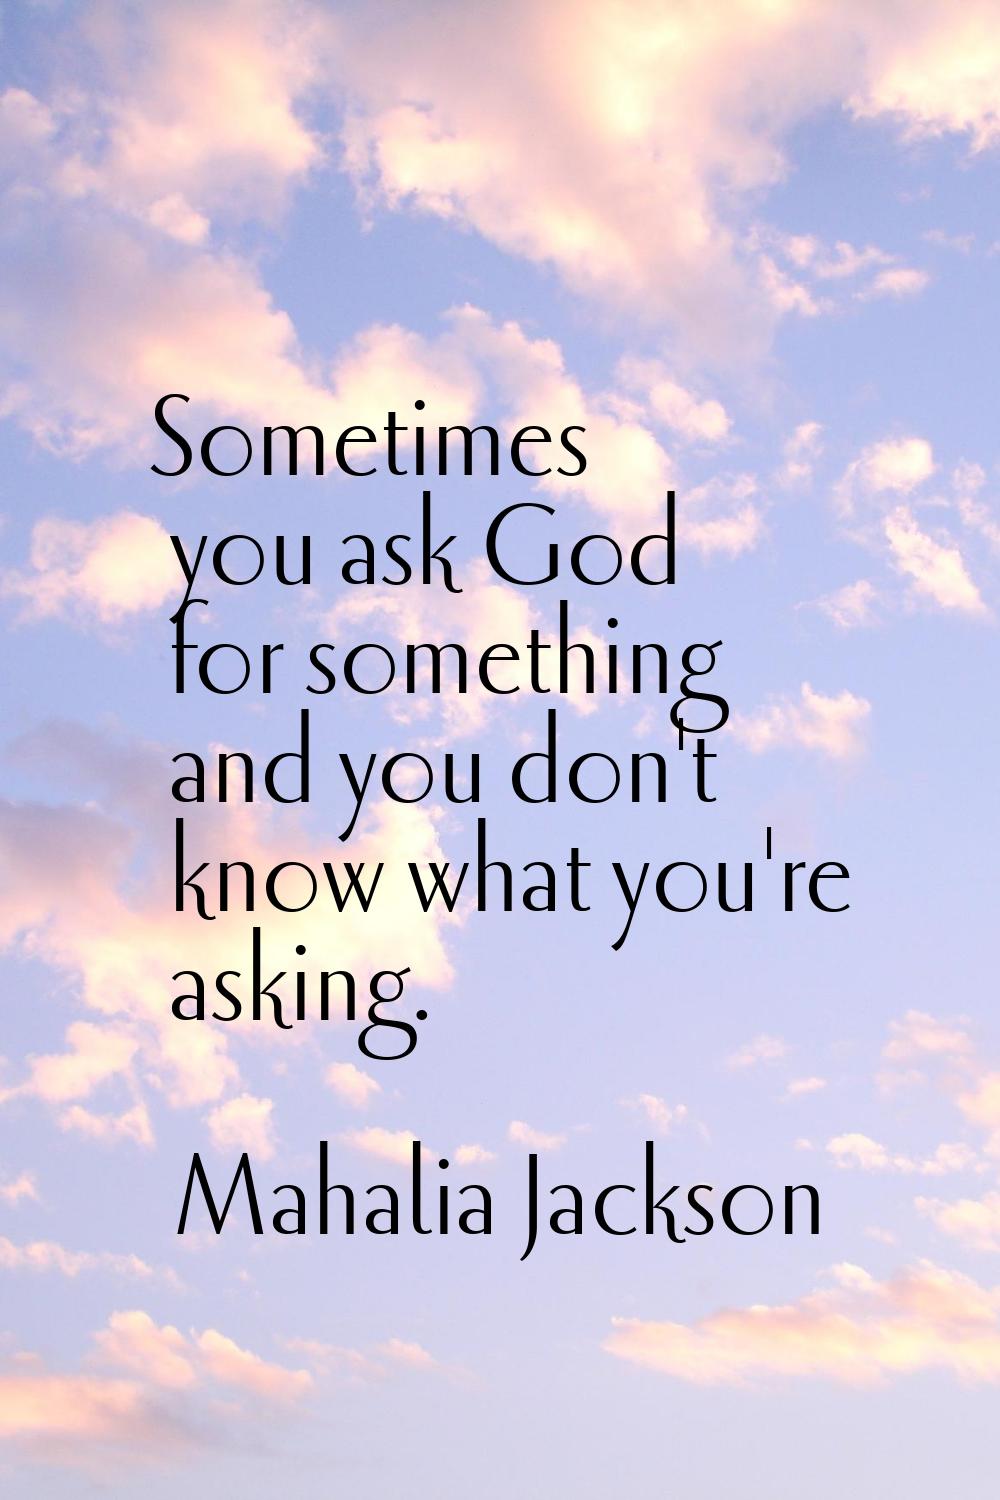 Sometimes you ask God for something and you don't know what you're asking.